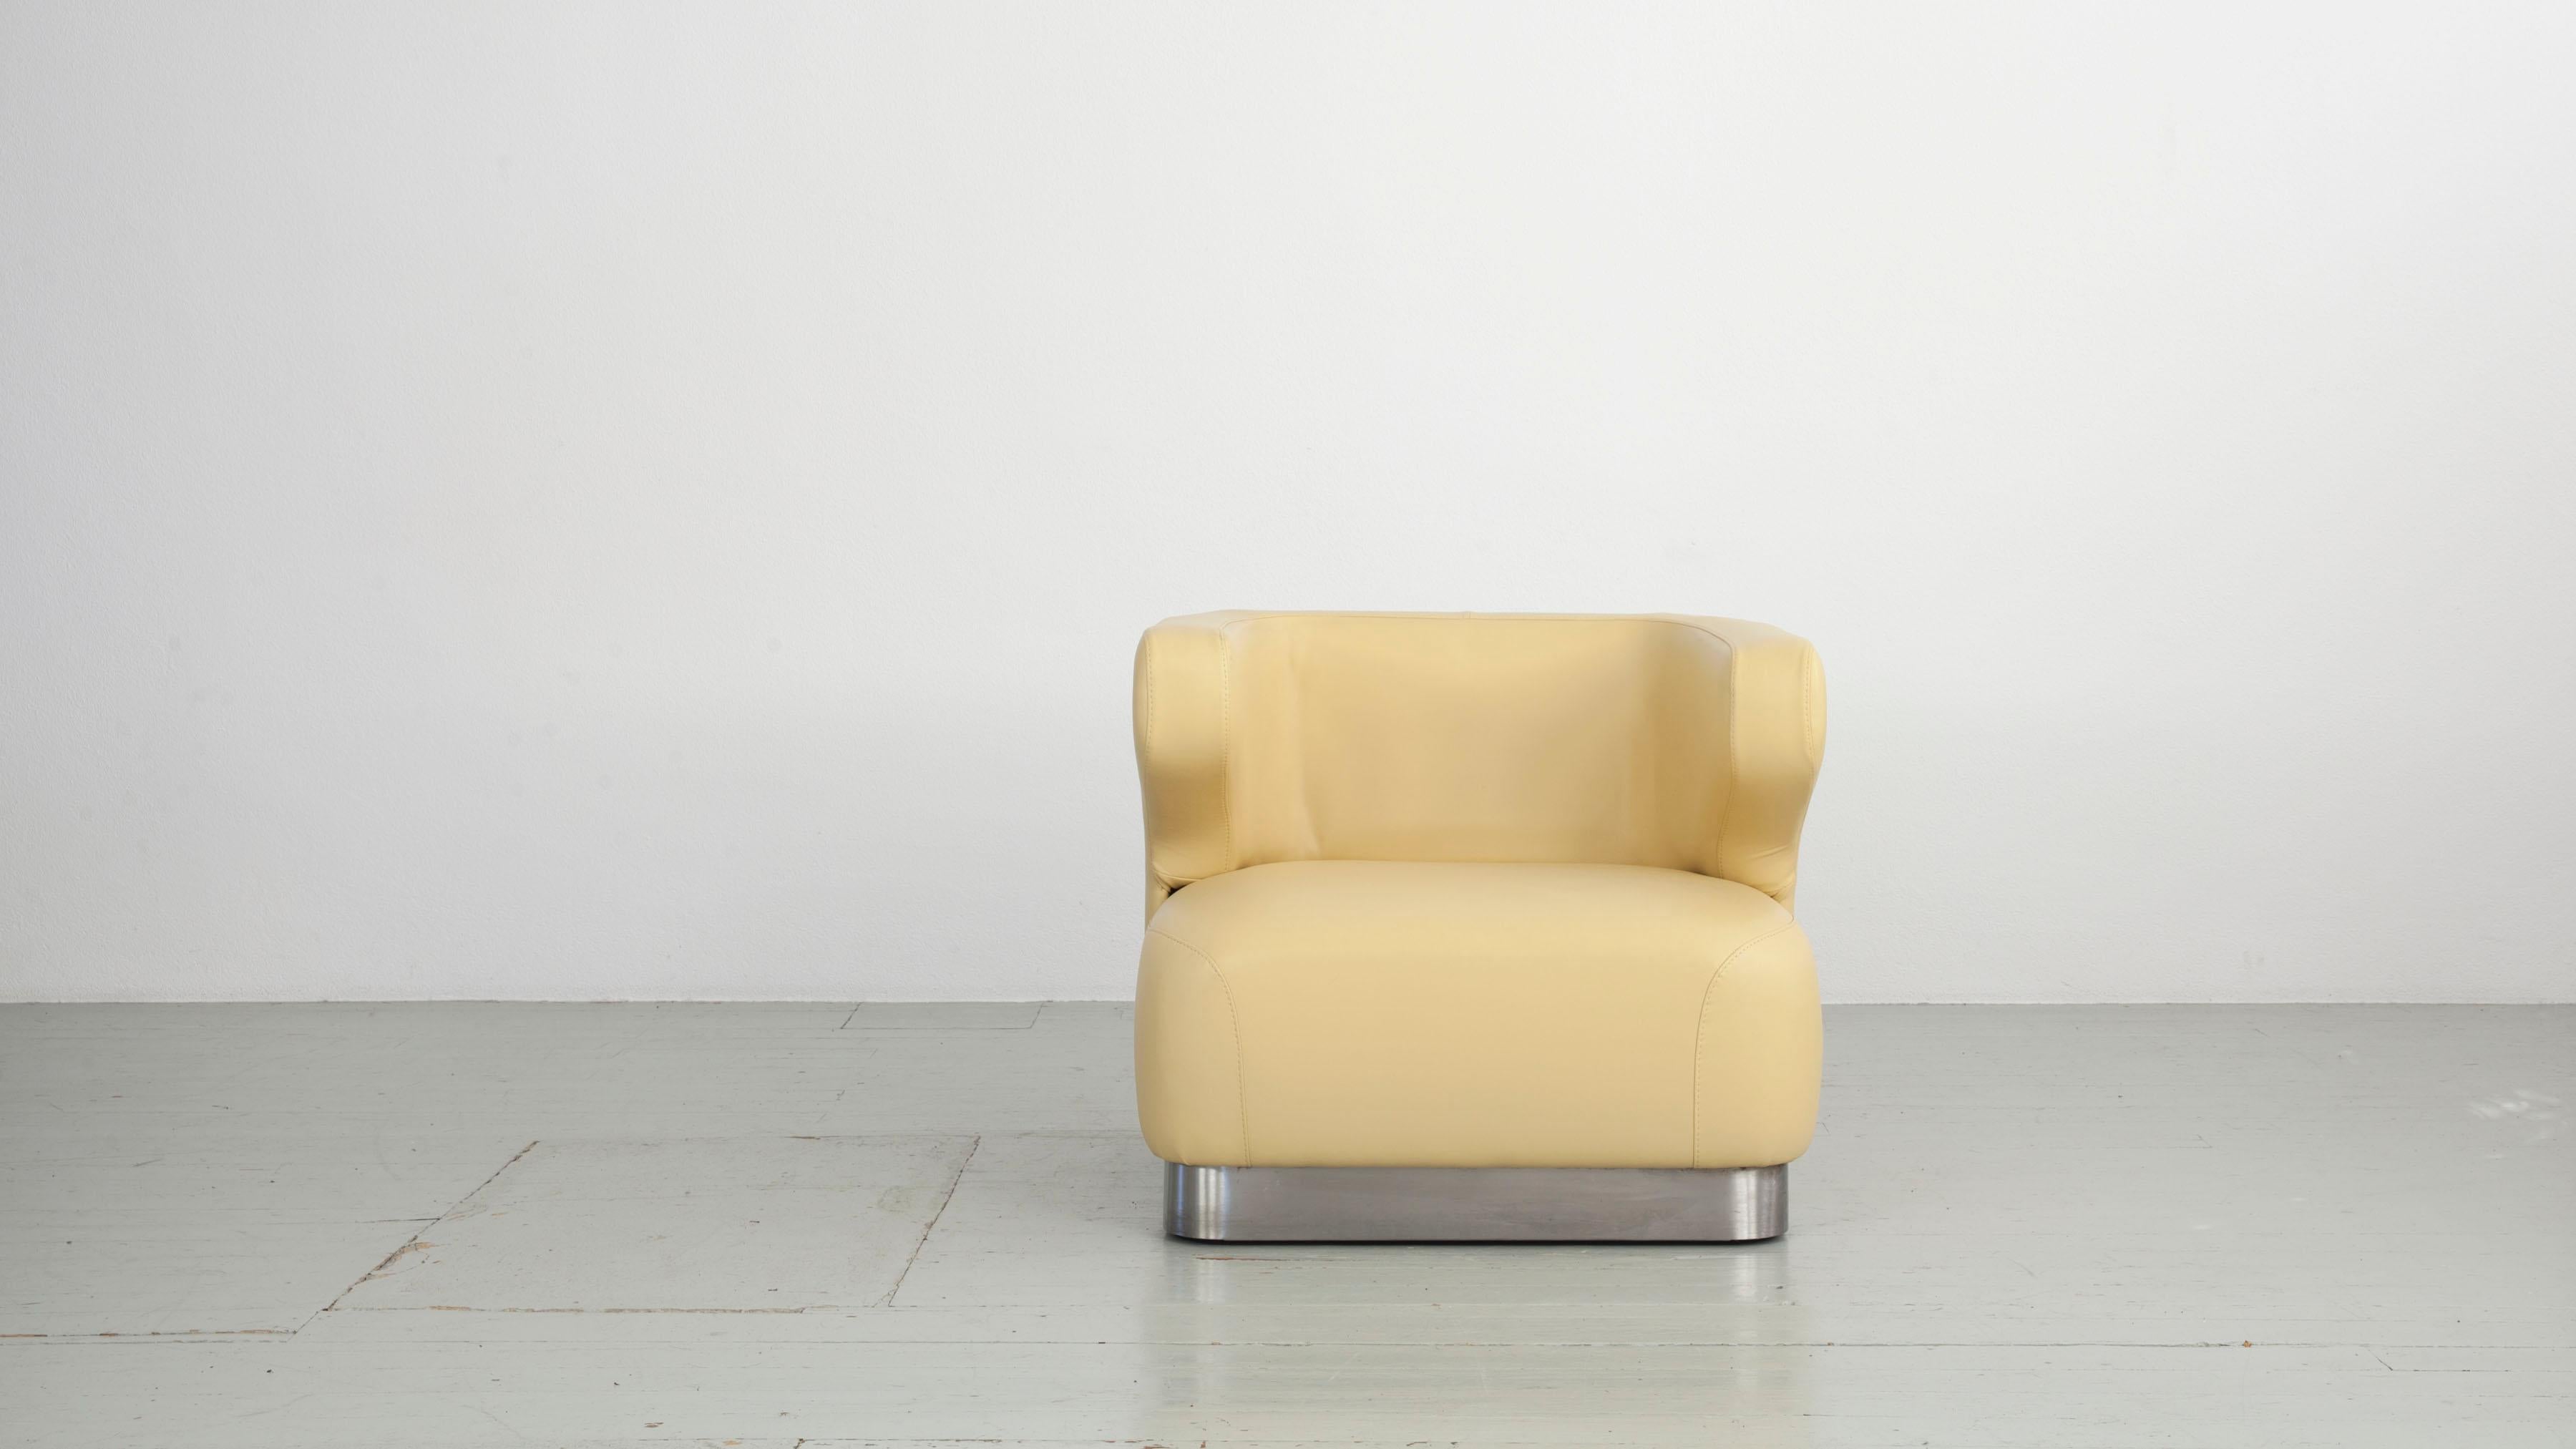 This Italian set designed by Gianni Moscatelli from the 70s was made by Formanova. It is covered with pastel yellow leatherette, which is in good condition. The set has wheels, which are hidden by a chrome frame. These wheels make the two armchairs